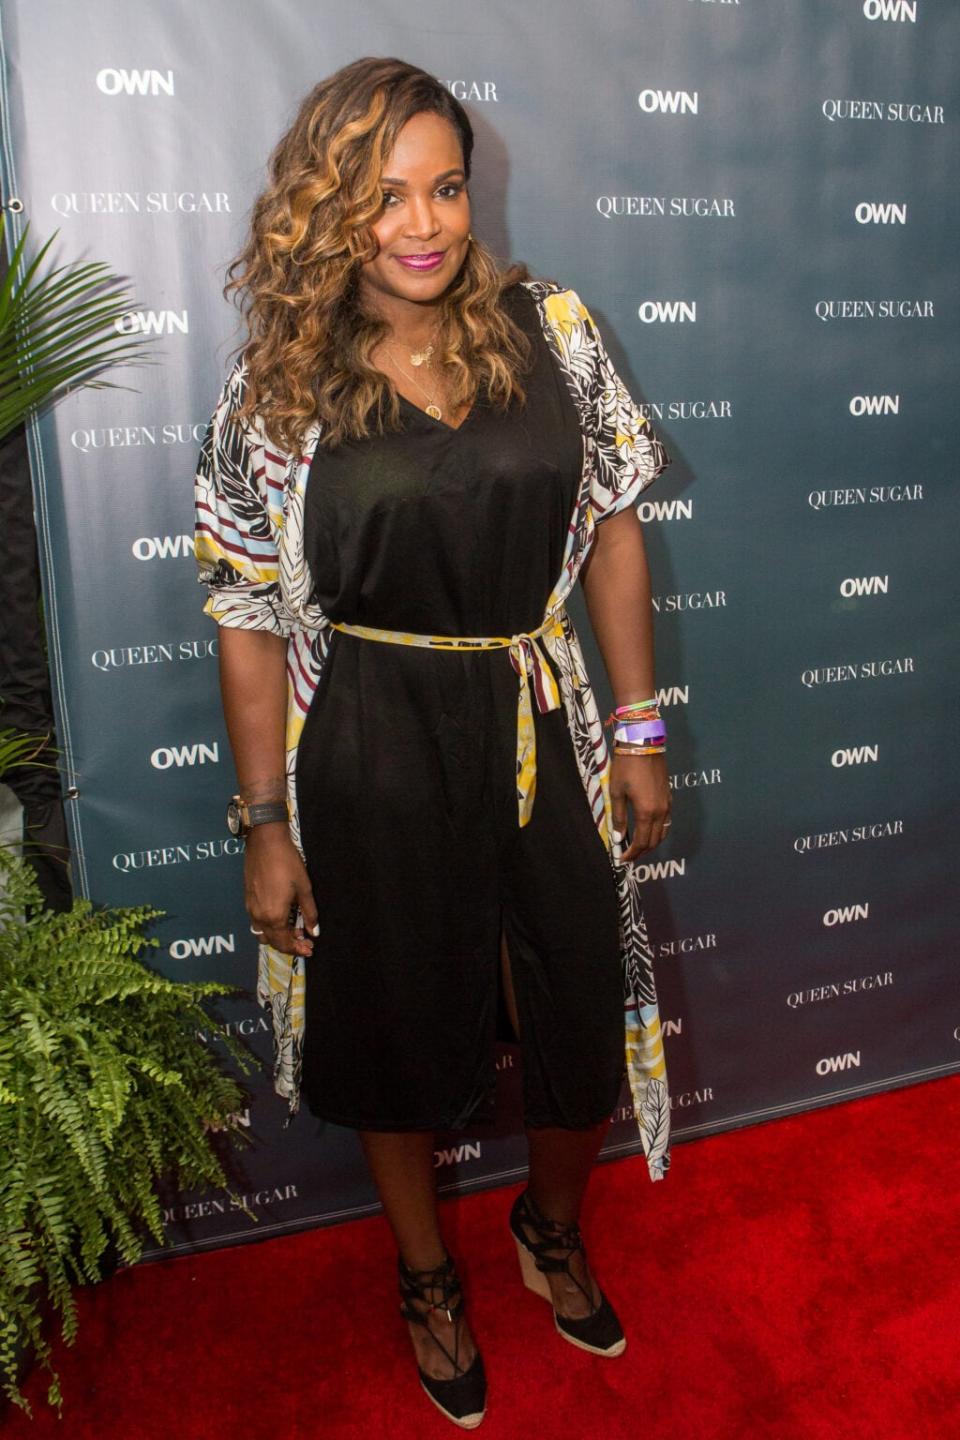 Tameka Foster Raymond attends a cocktail reception for “Queen Sugar” at Liberty Kitchen on July 2, 2016 in New Orleans, Louisiana. (Photo by Josh Brasted/Getty Images for OWN: Oprah Winfrey Network)